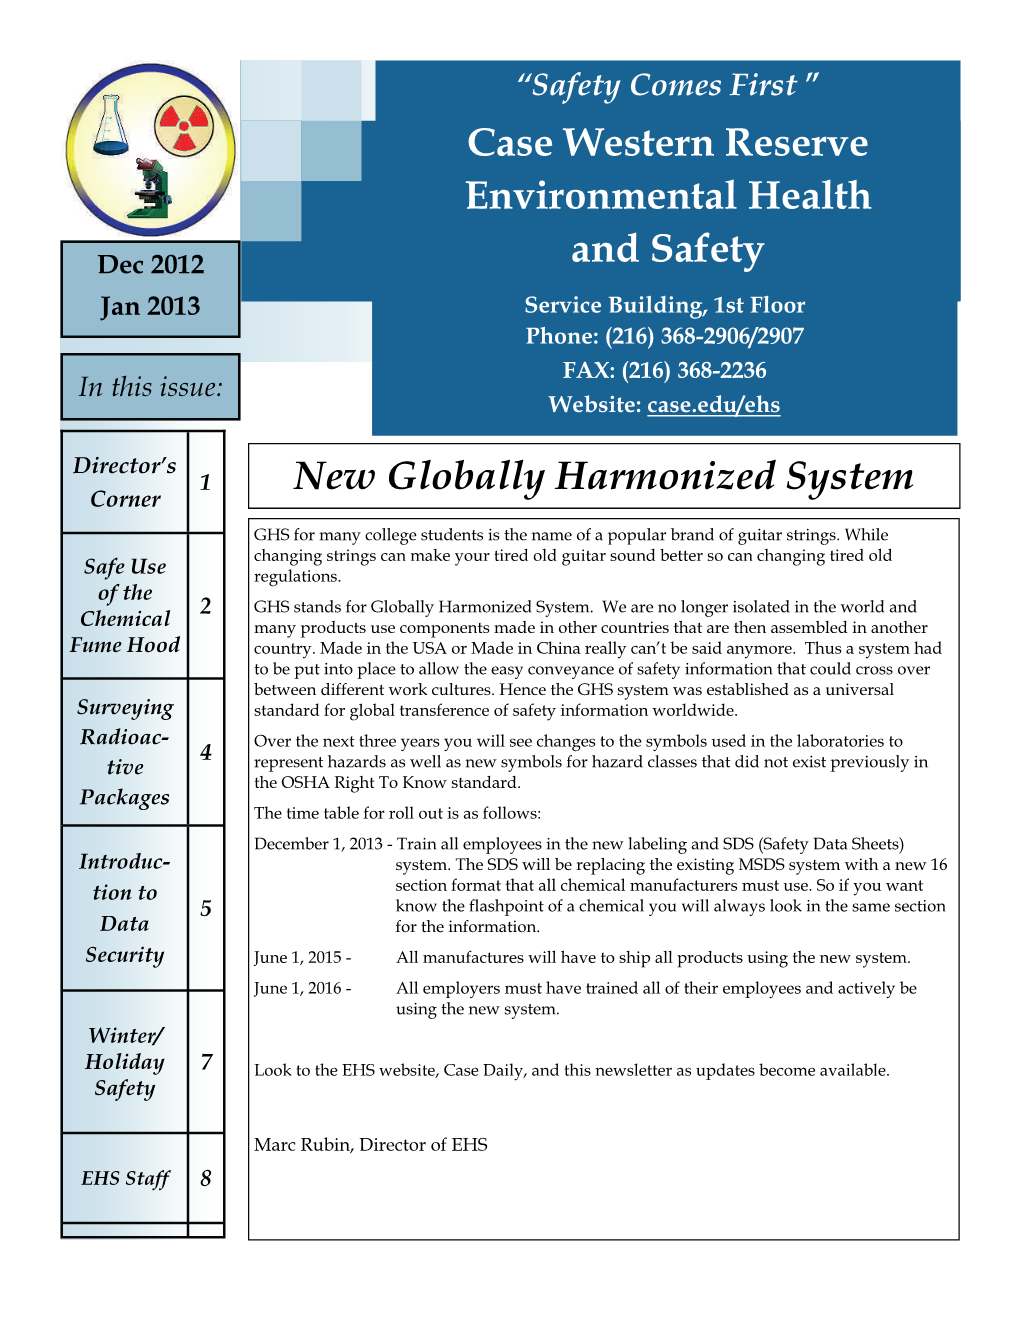 Case Western Reserve Environmental Health and Safety New Globally